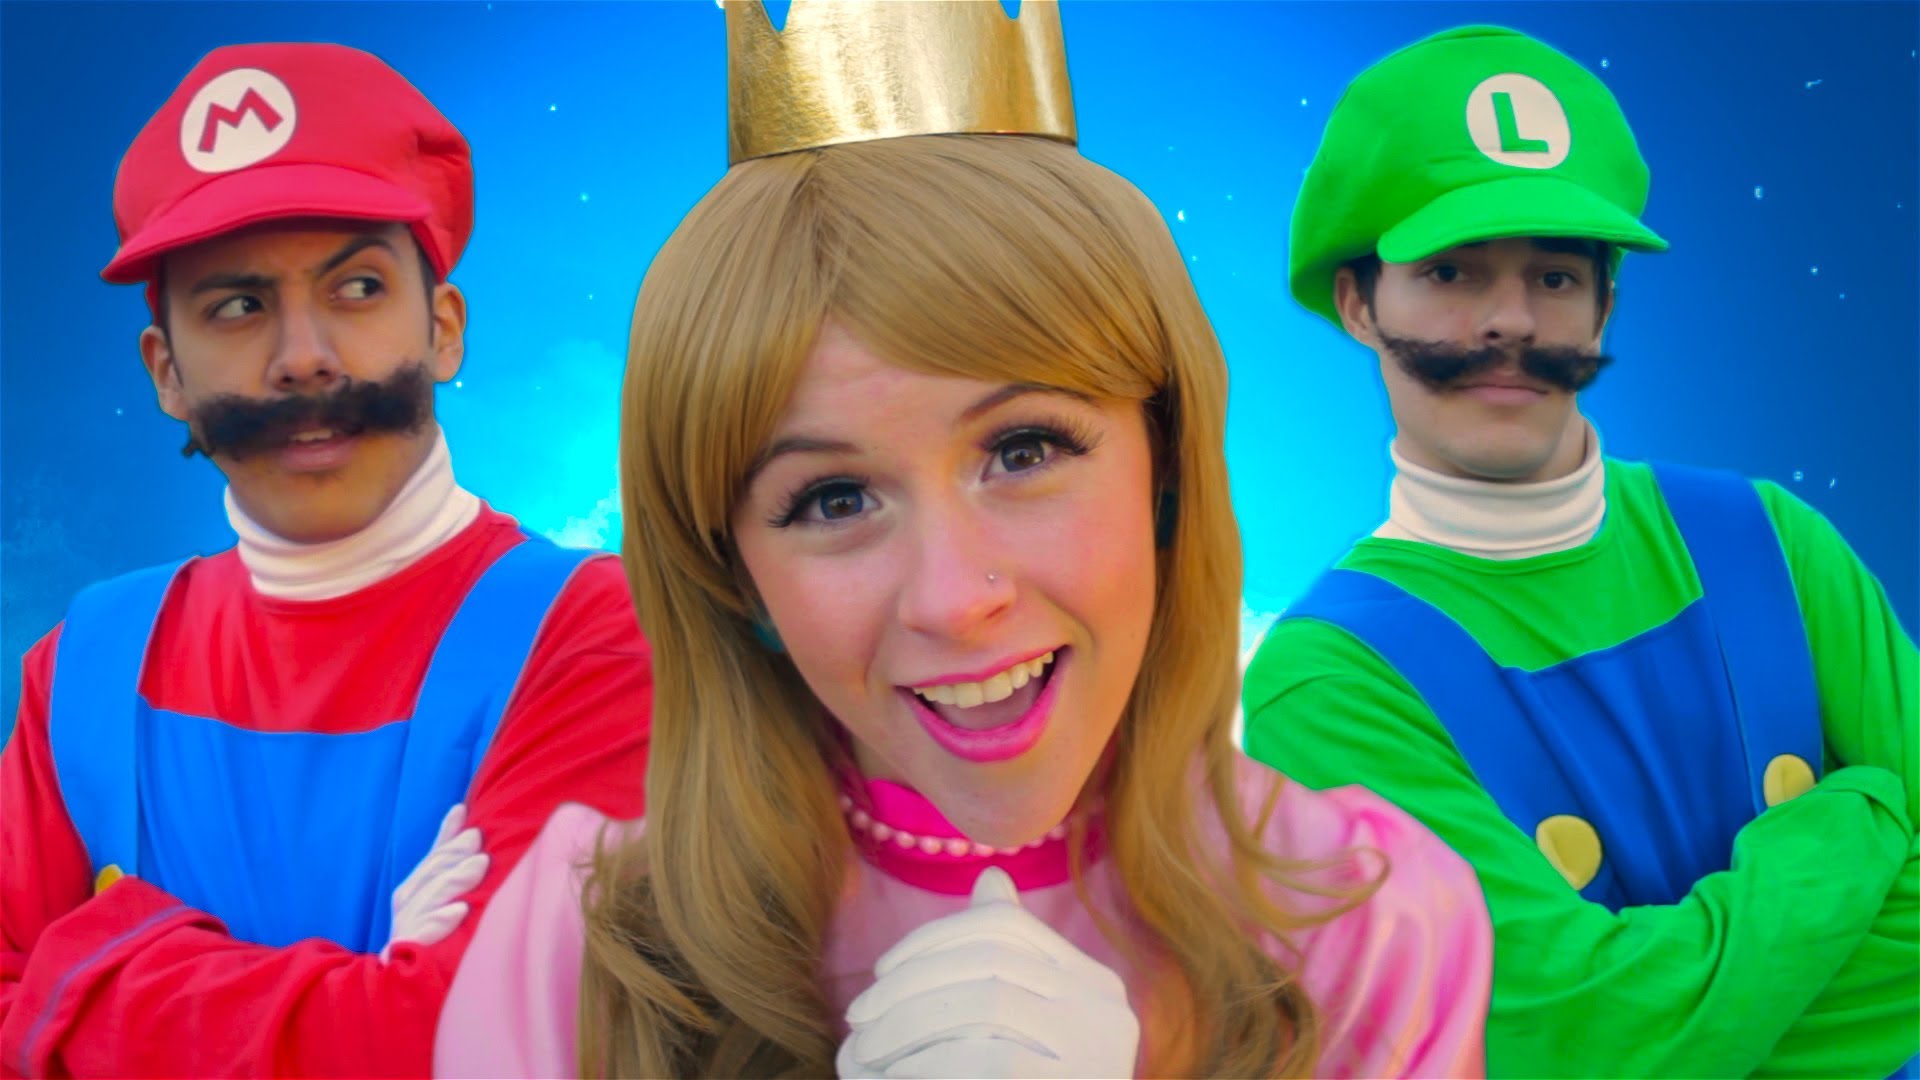 Super Mario 3D World The Musical, Peach Joins the <b>Mario Brothers</b> Team With a ... - super-mario-3d-world-the-musical-peach-joins-the-mario-brothers-team-with-a-song